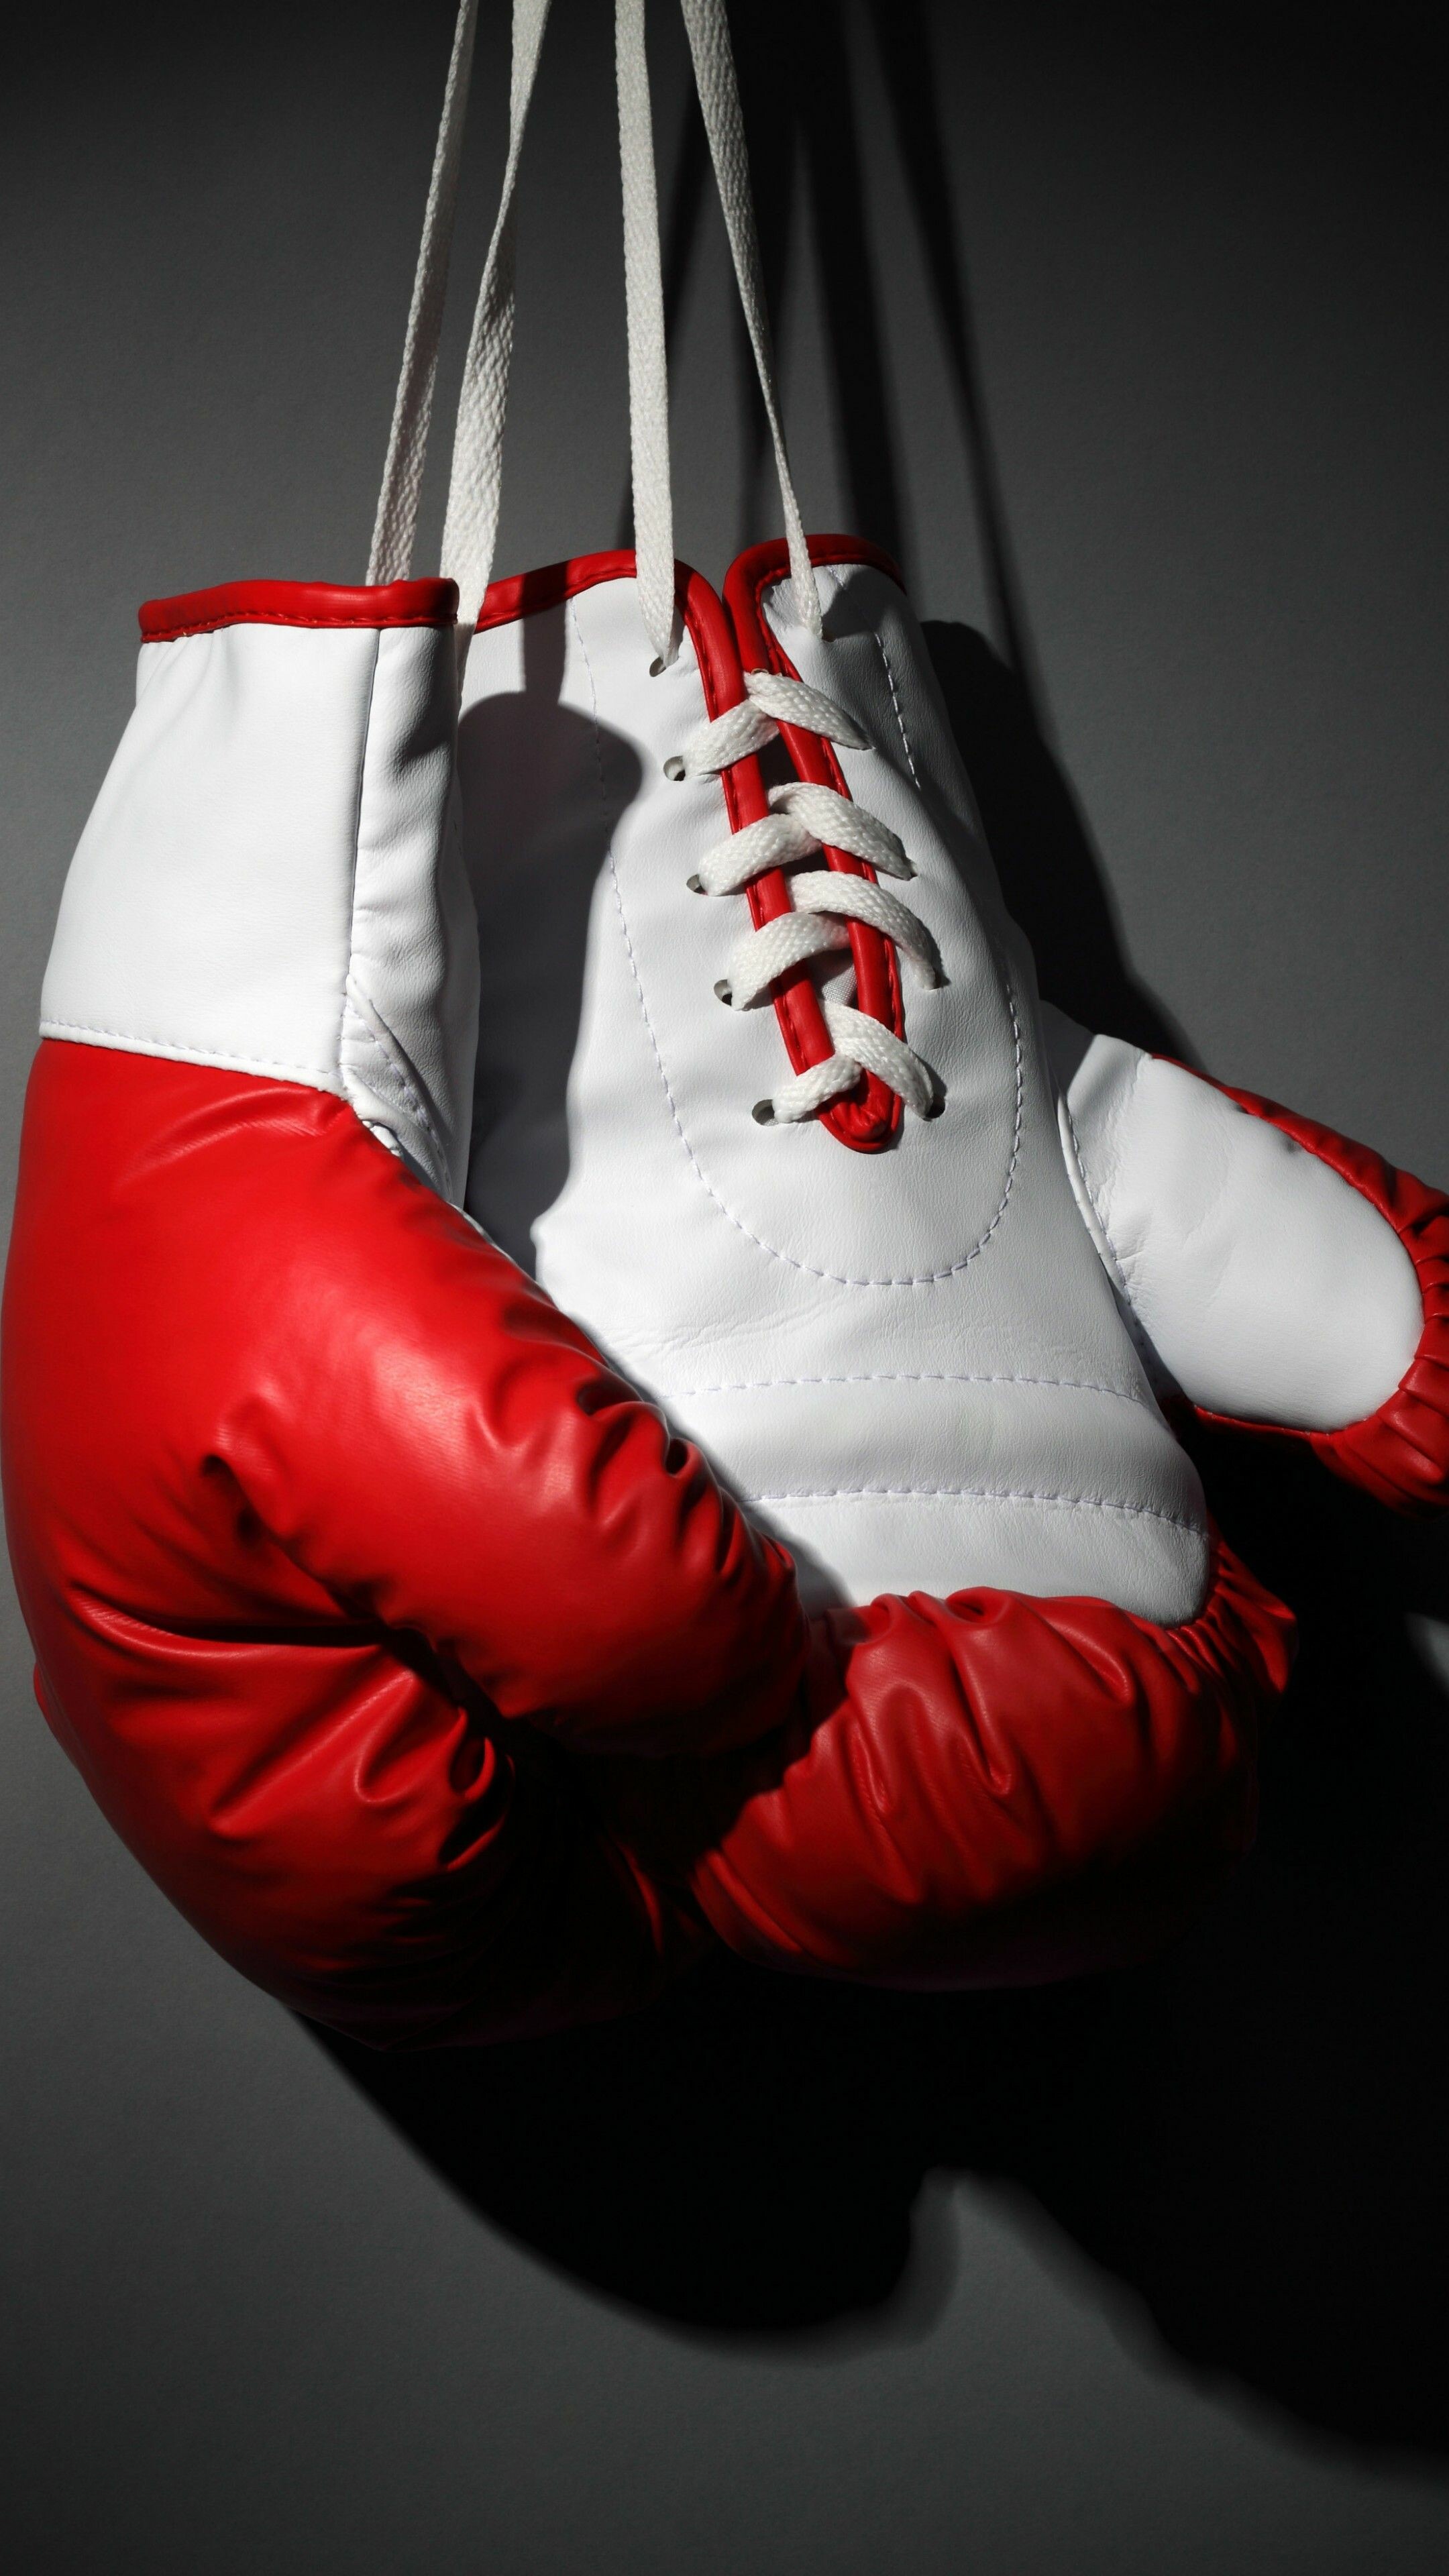 Boxing: The sport evolved from 16th- and 18th-century prizefights. 2160x3840 4K Background.